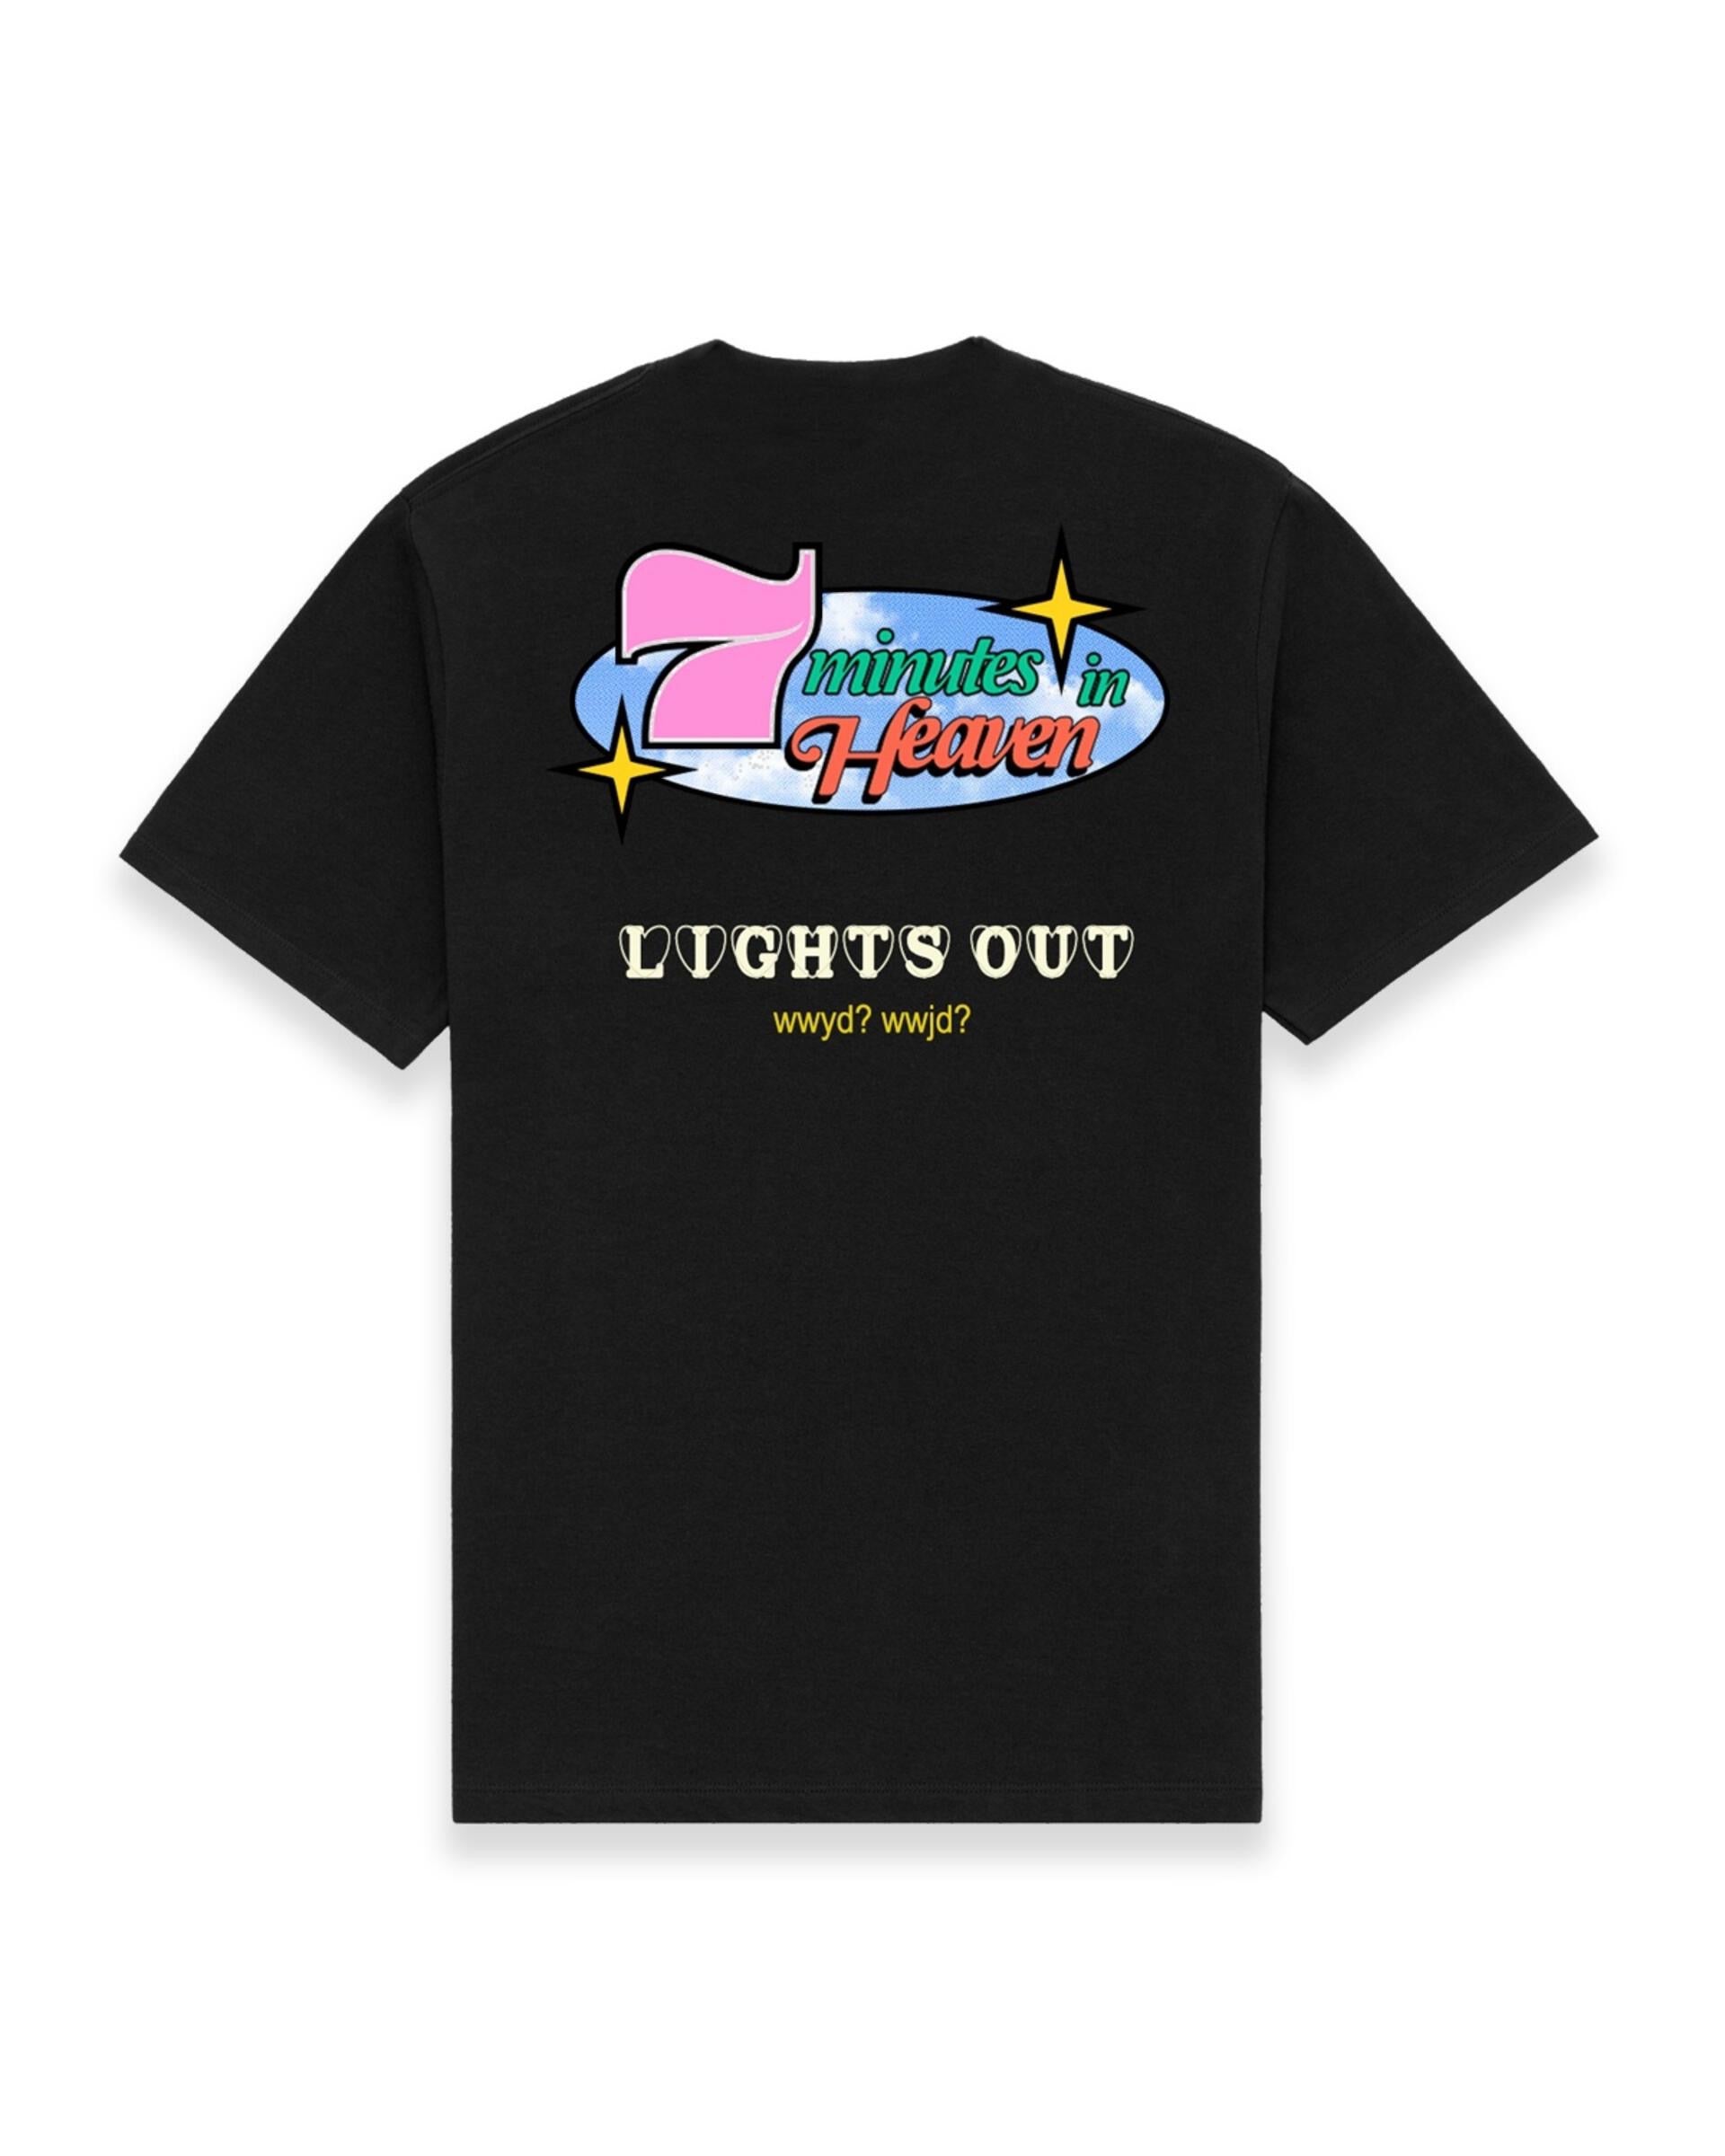 Lifted Anchors Lights Out Tee - Black